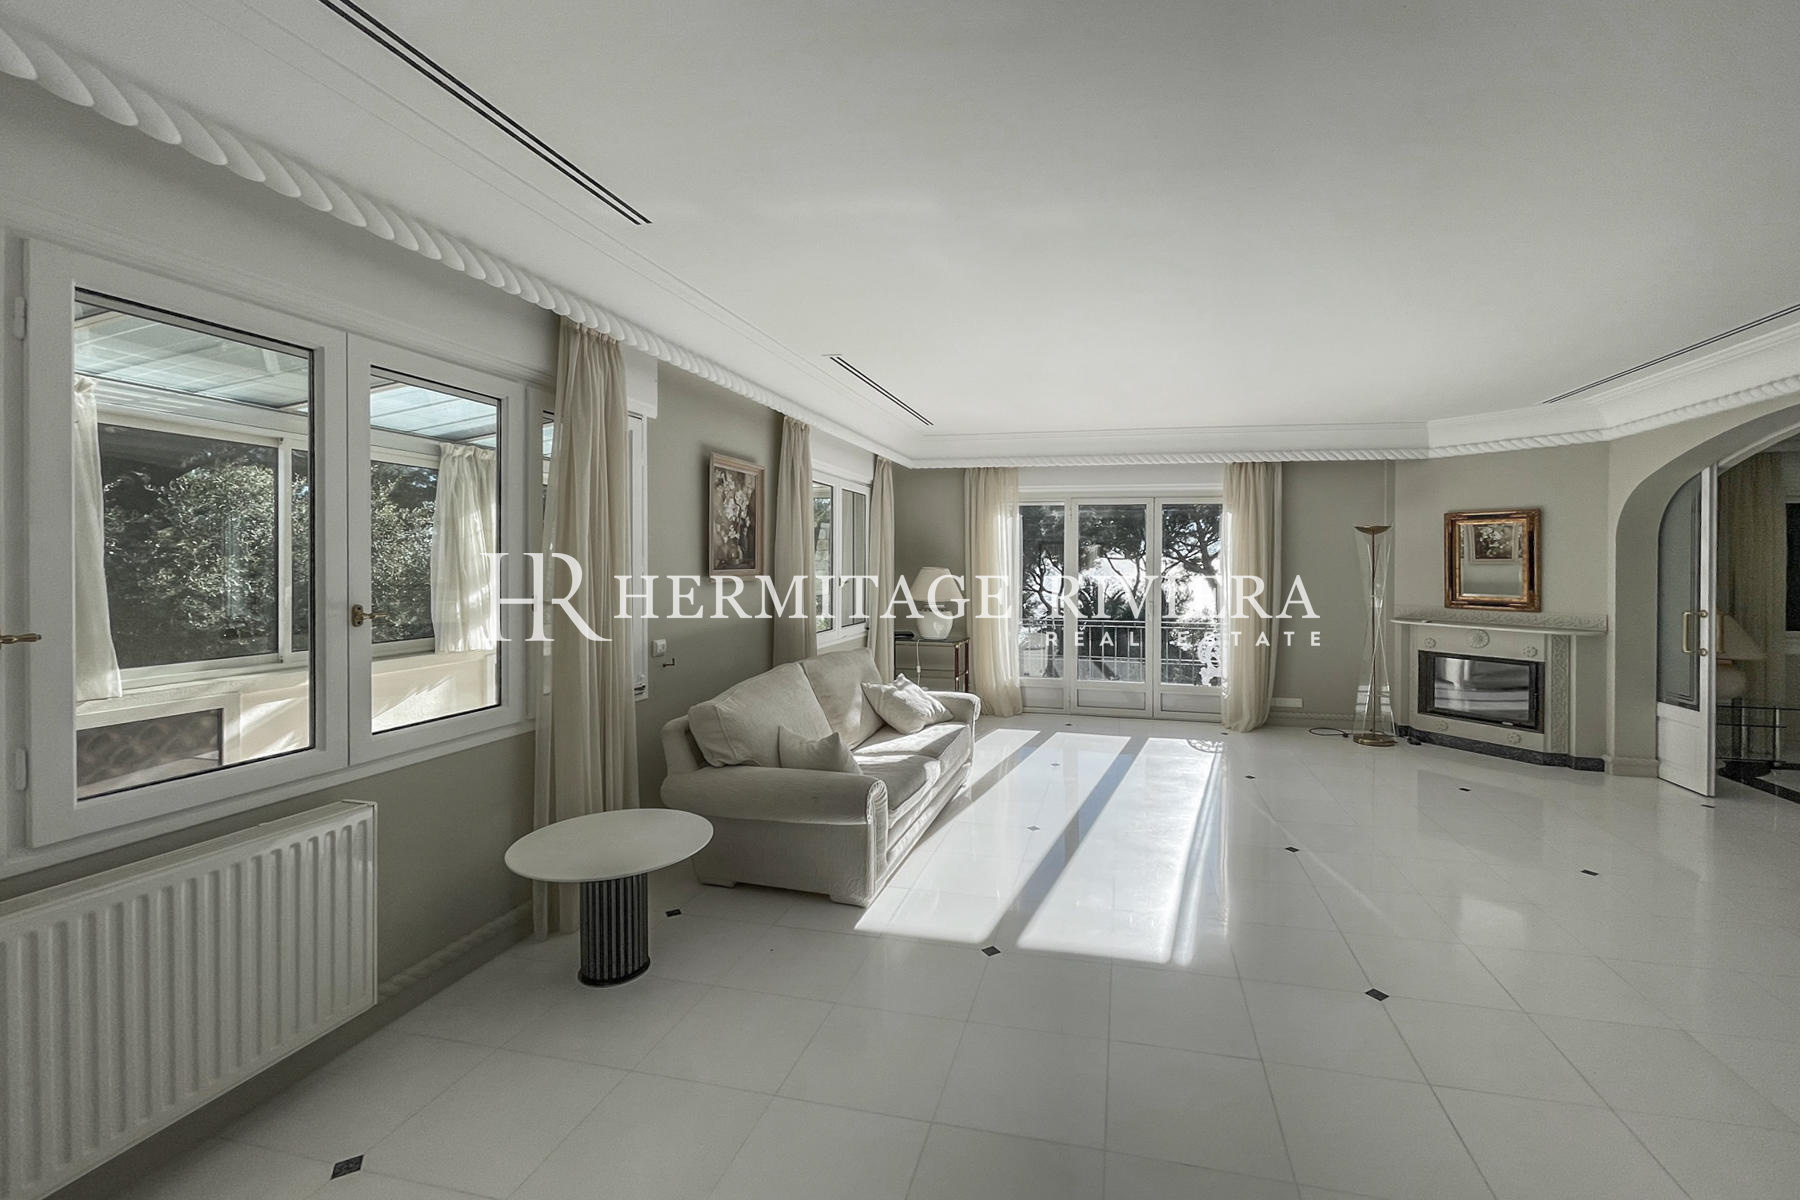 Property with views Monaco in sought after location (image 9)